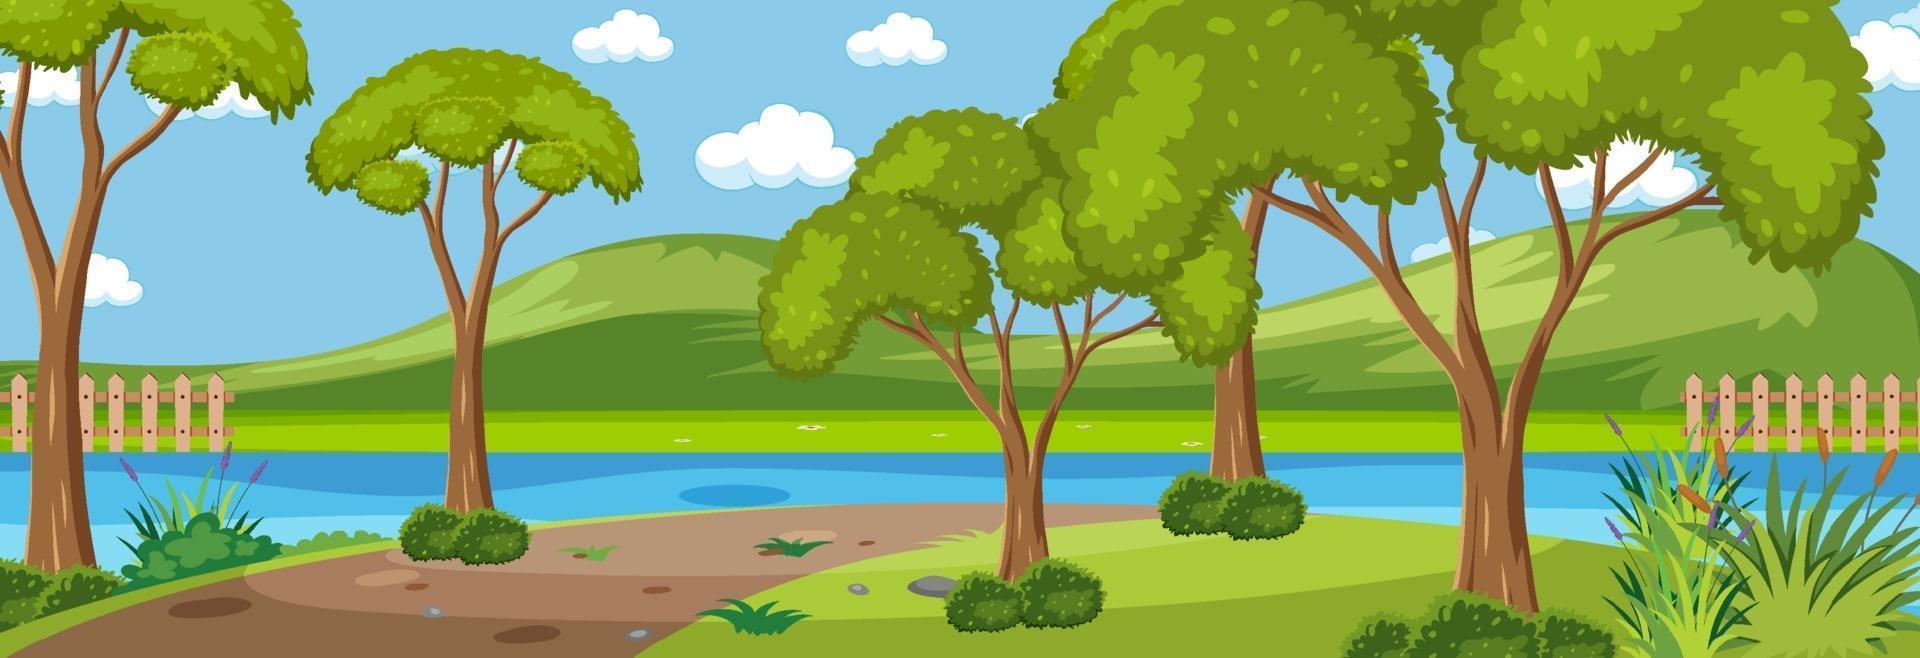 Forest along the river horizontal scene at day time with many trees vector